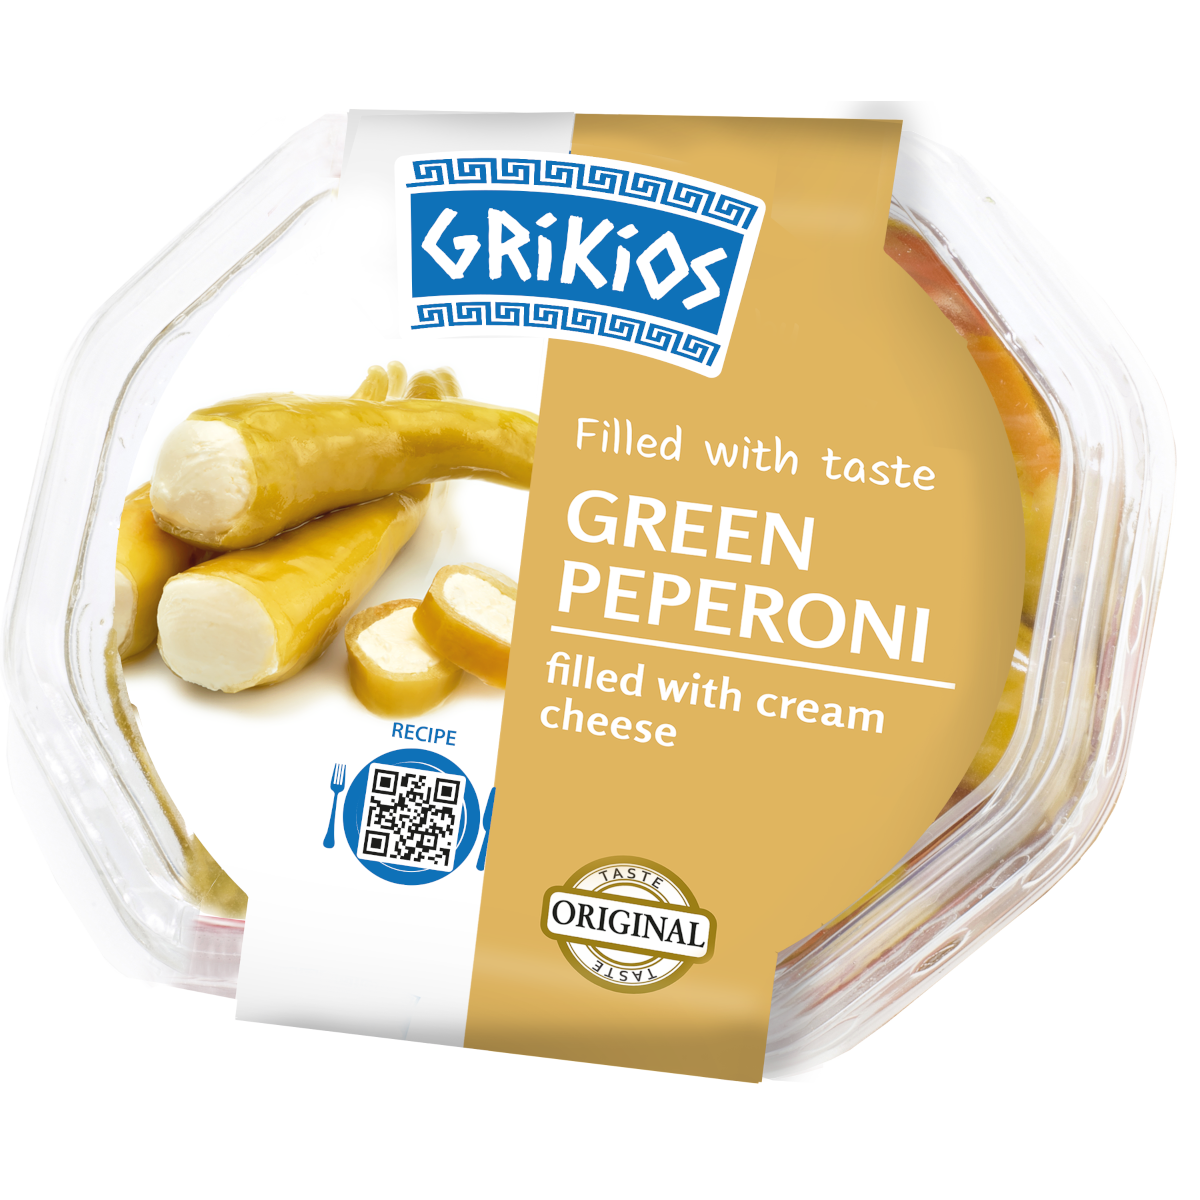 Grikios green peperoni filled with fresh cheese